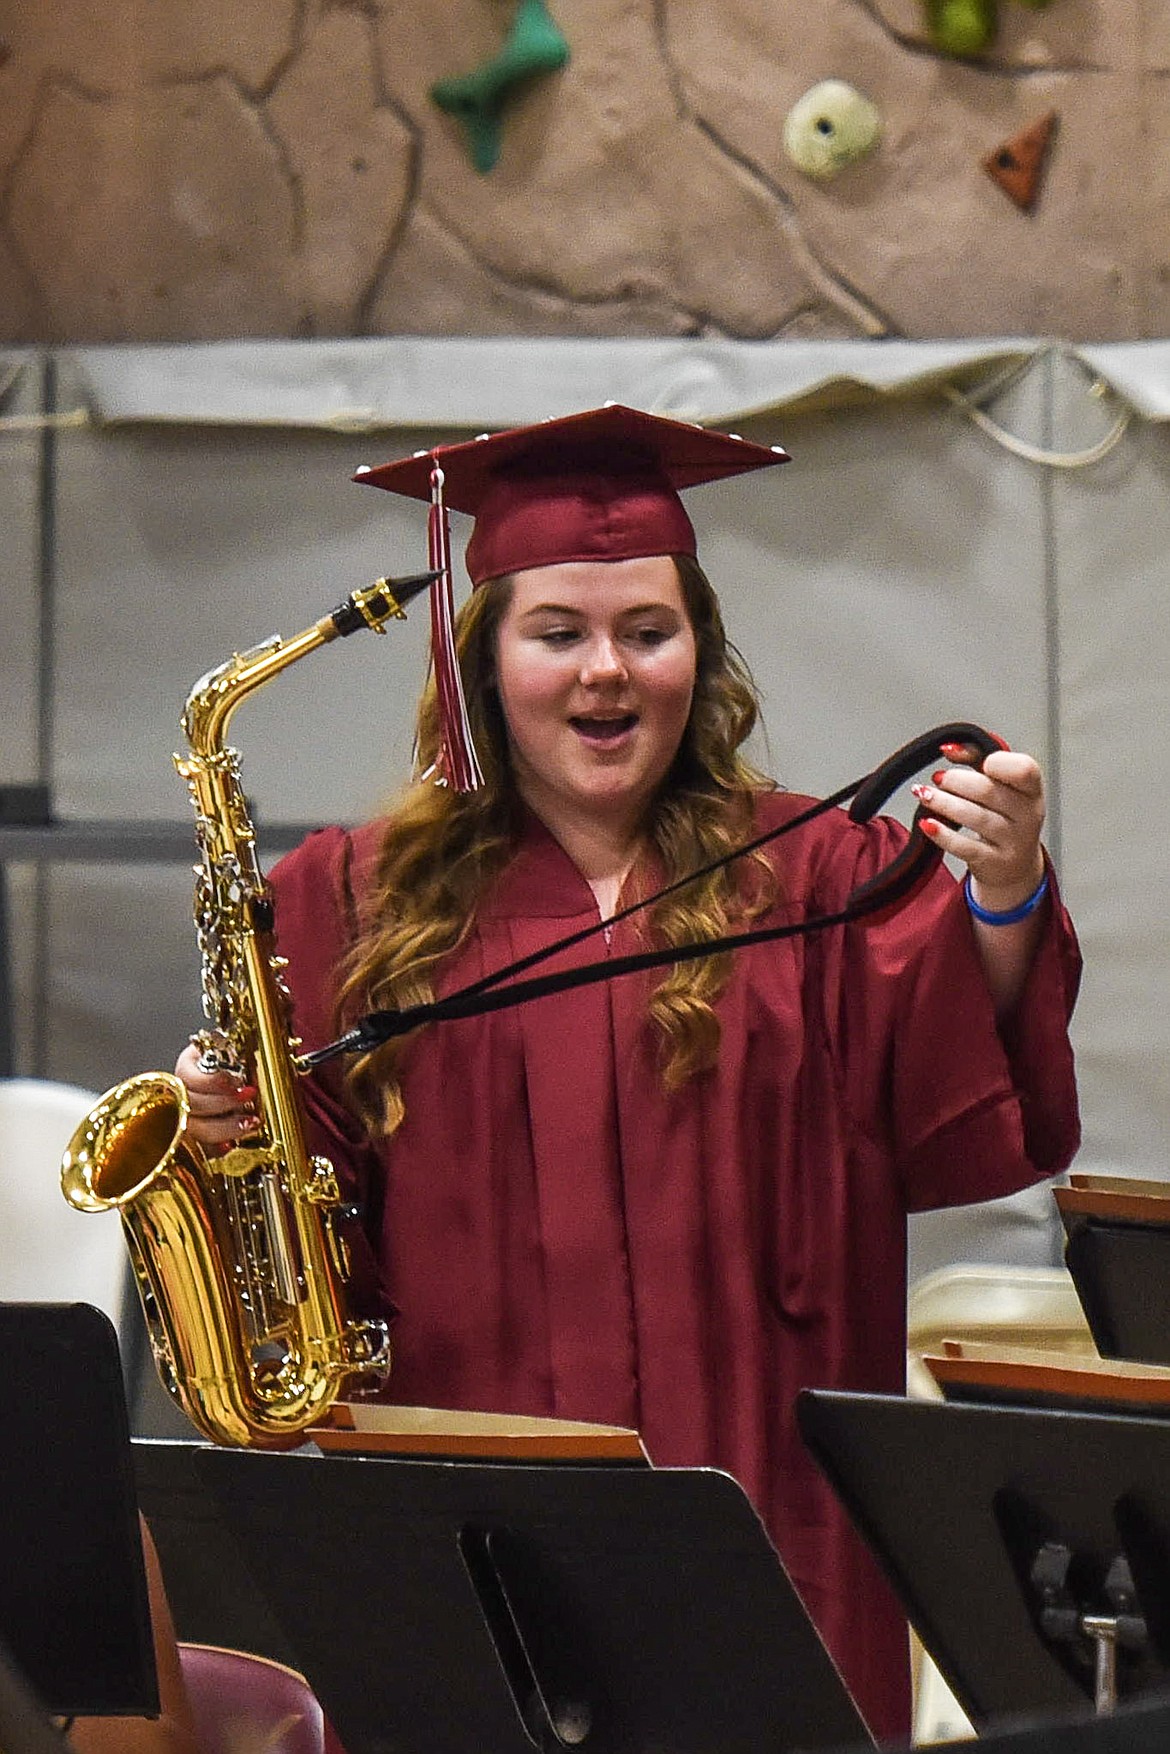 Troy High School&#146;s Tristyn Winebark prepares to join the band in playing &#147;Old Devil Moon,&#148; Saturday at Troy&#146;s graduation. (Ben Kibbey/The Western News